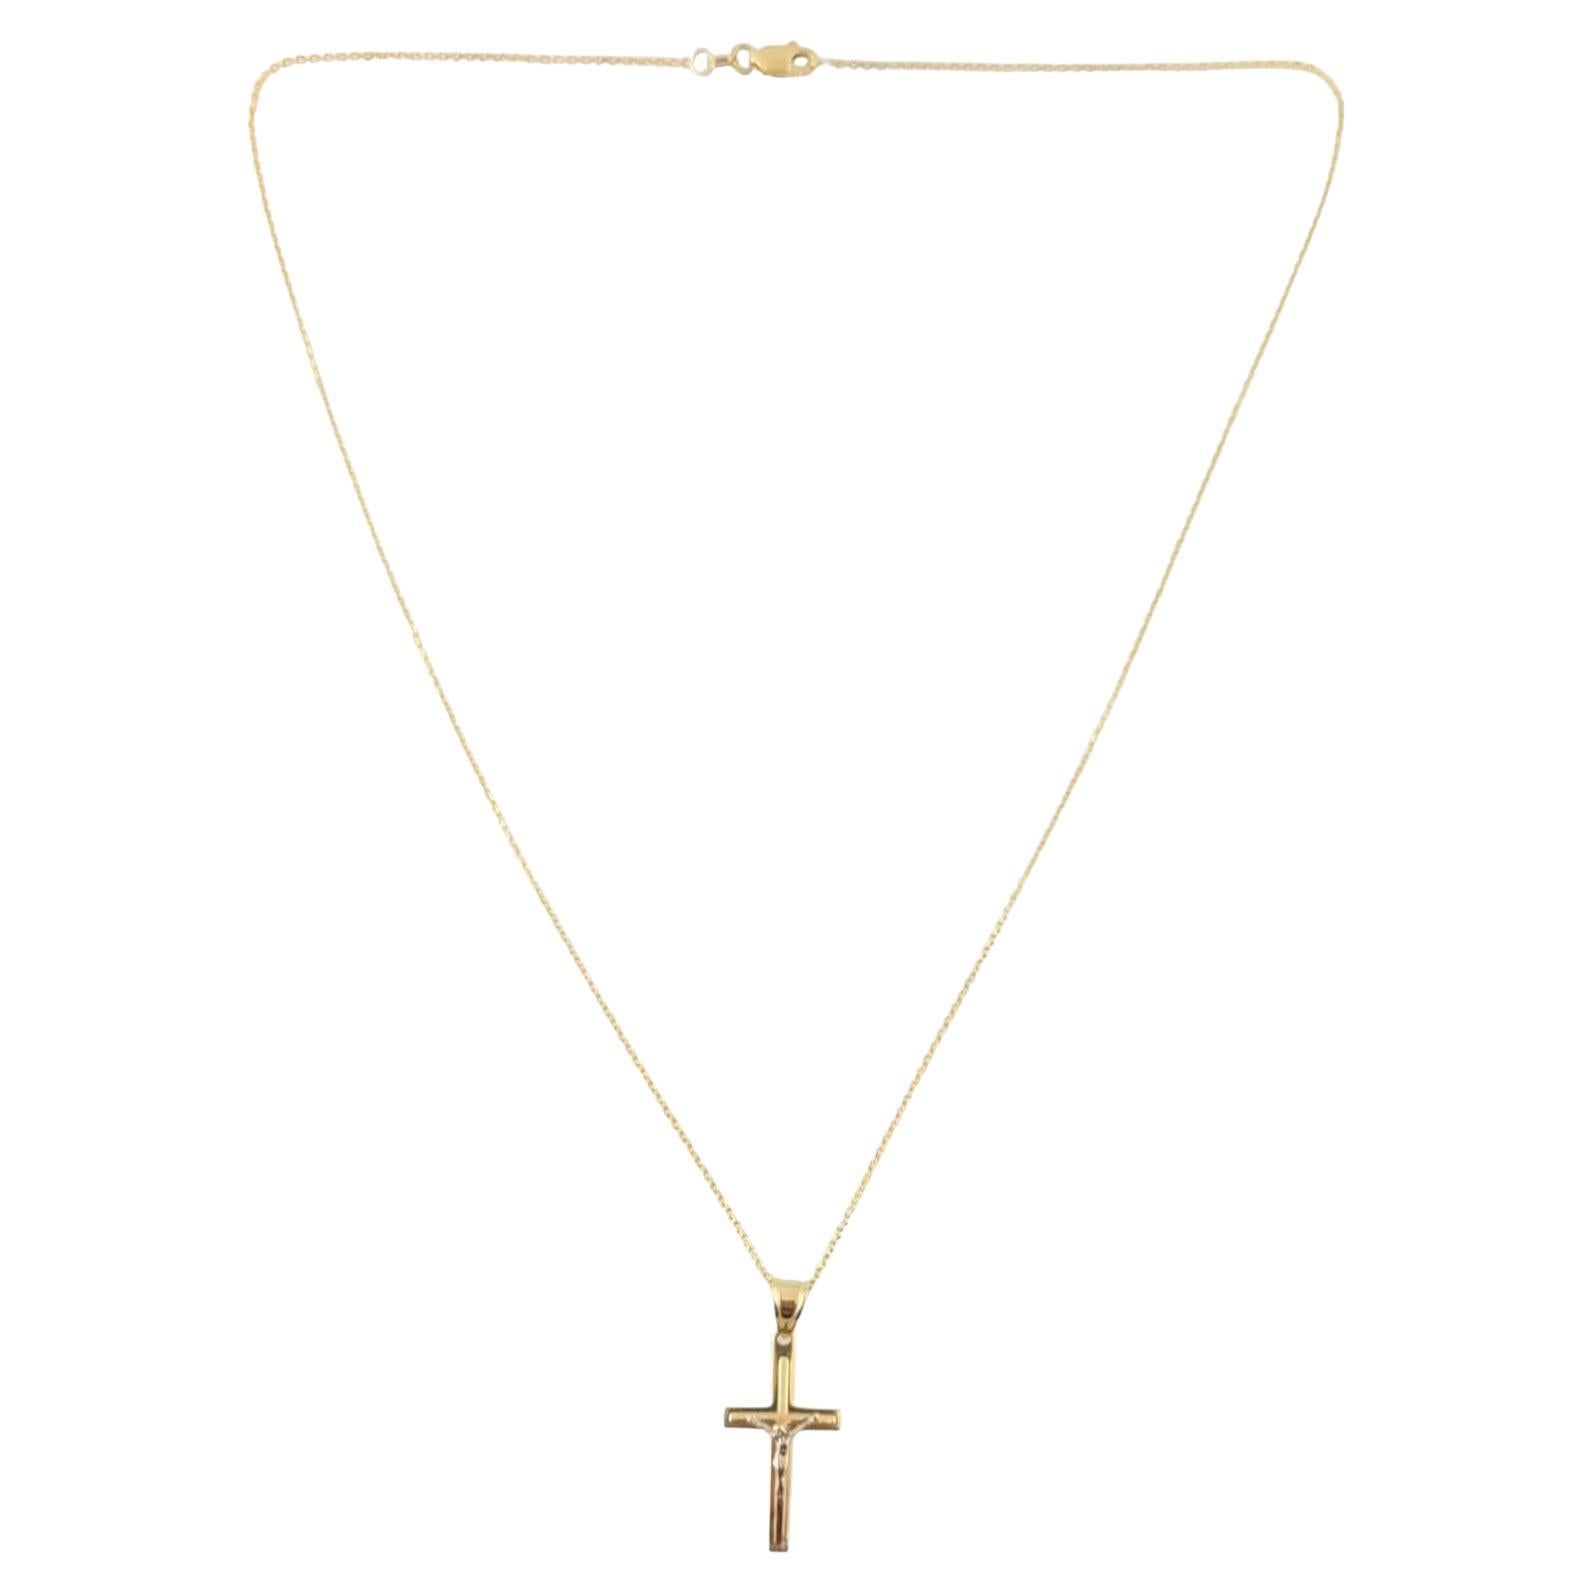  14K Yellow and White Gold Crucifix Pendant Necklace #14976